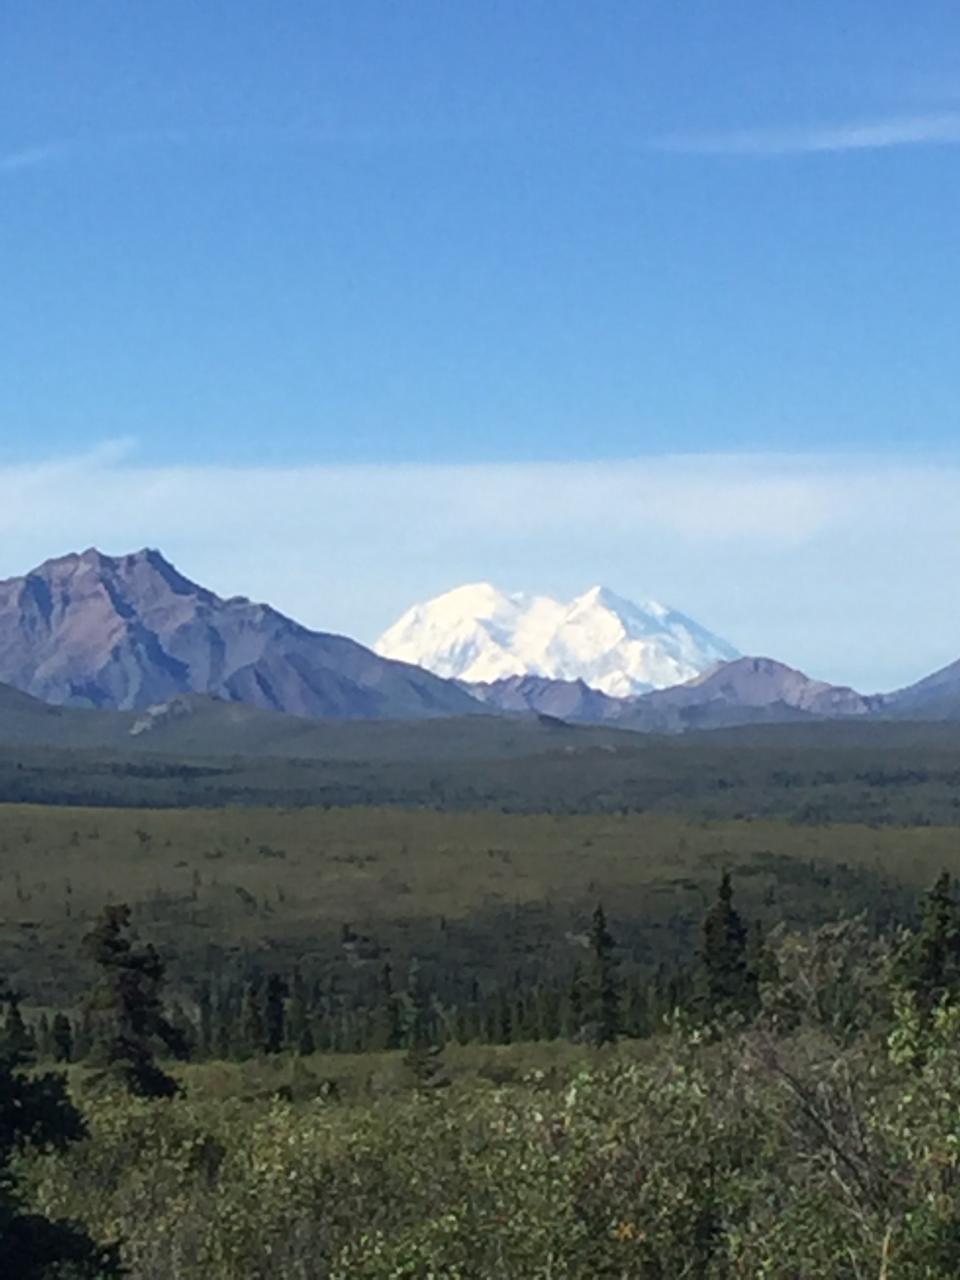 Only 30 percent of visitors to Denali actually see the mountain. (Photo: Courtesy of Ann Brenoff)